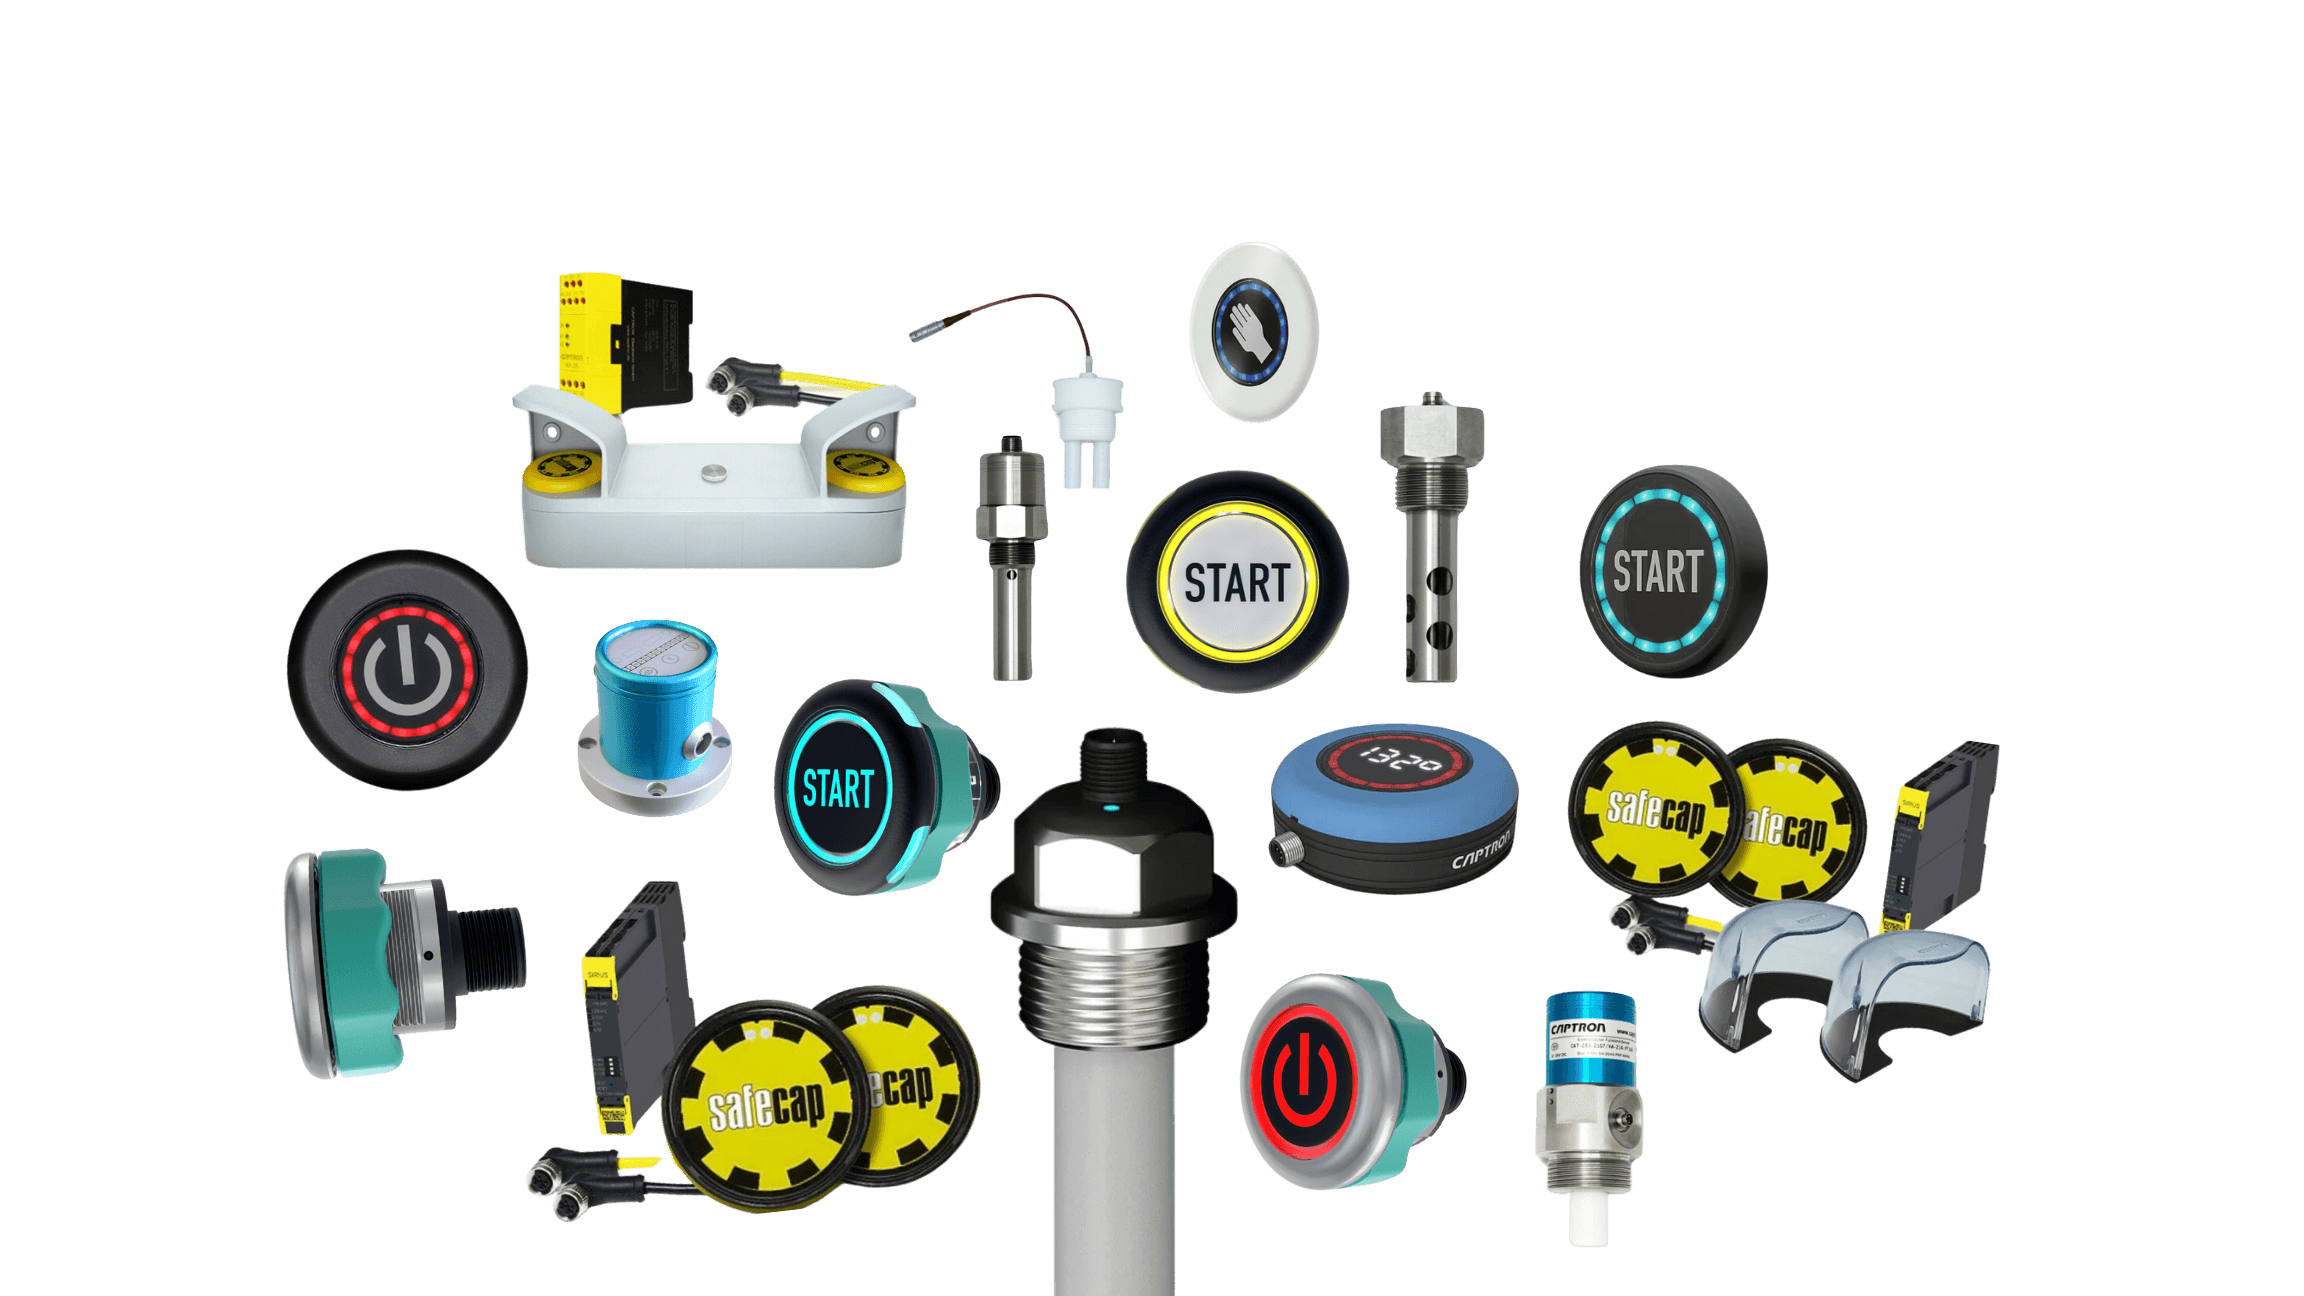 A collection of Captron products including push buttons, capacitive sensors, safety devices, and switches.